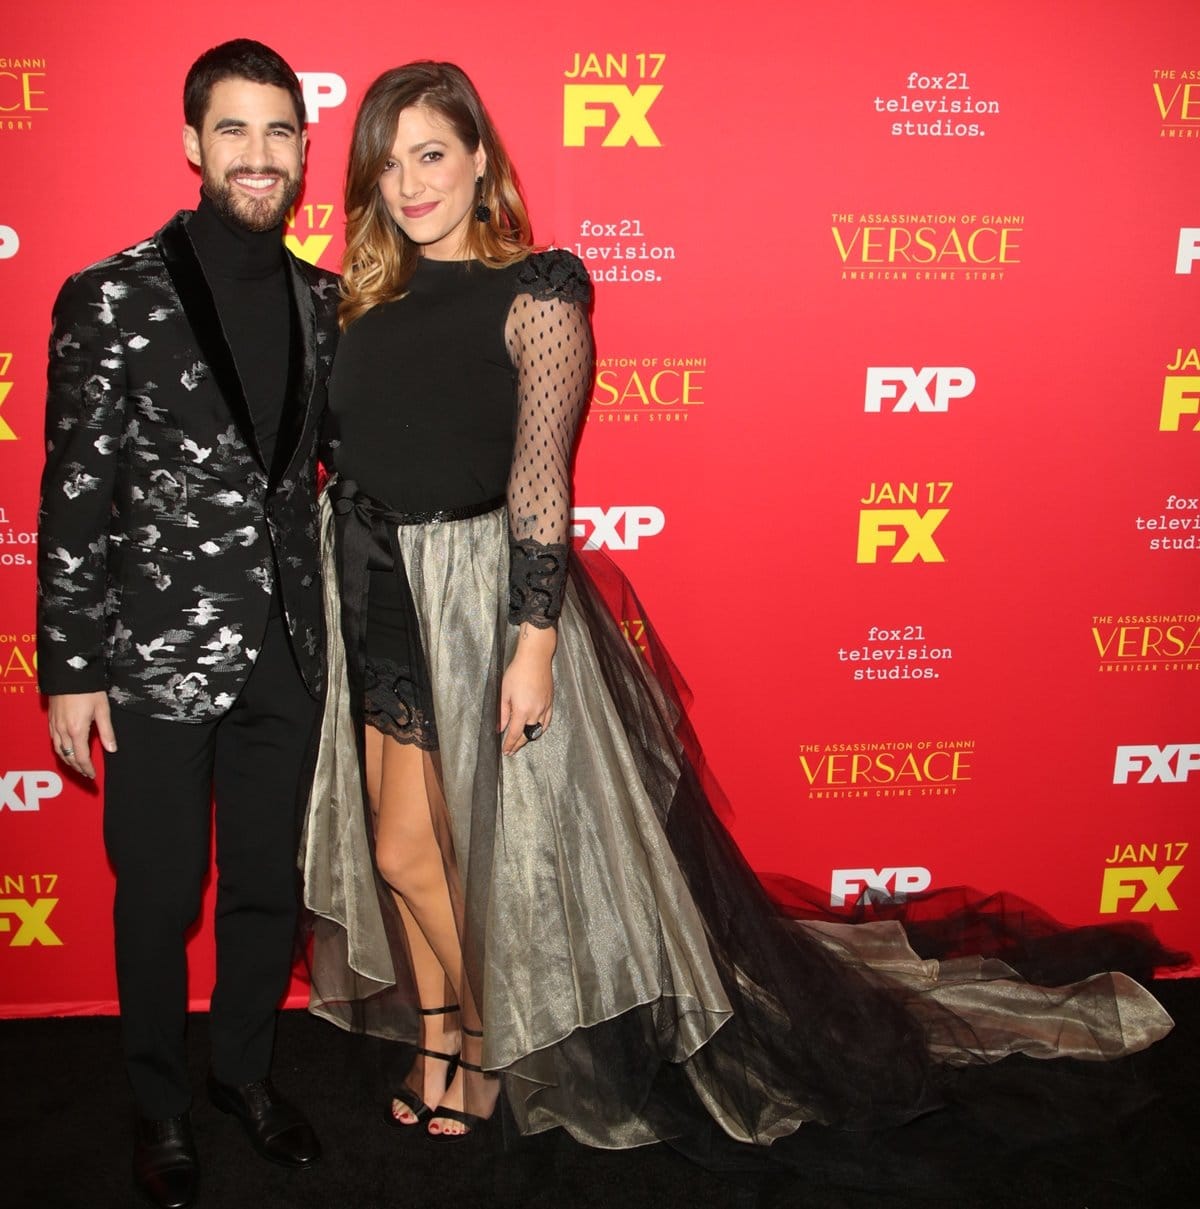 Wearing Emporio Amani, Darren Criss got support from his girlfriend Mia Swier at the premiere of his new series American Crime Story: The Assassination of Gianni Versace